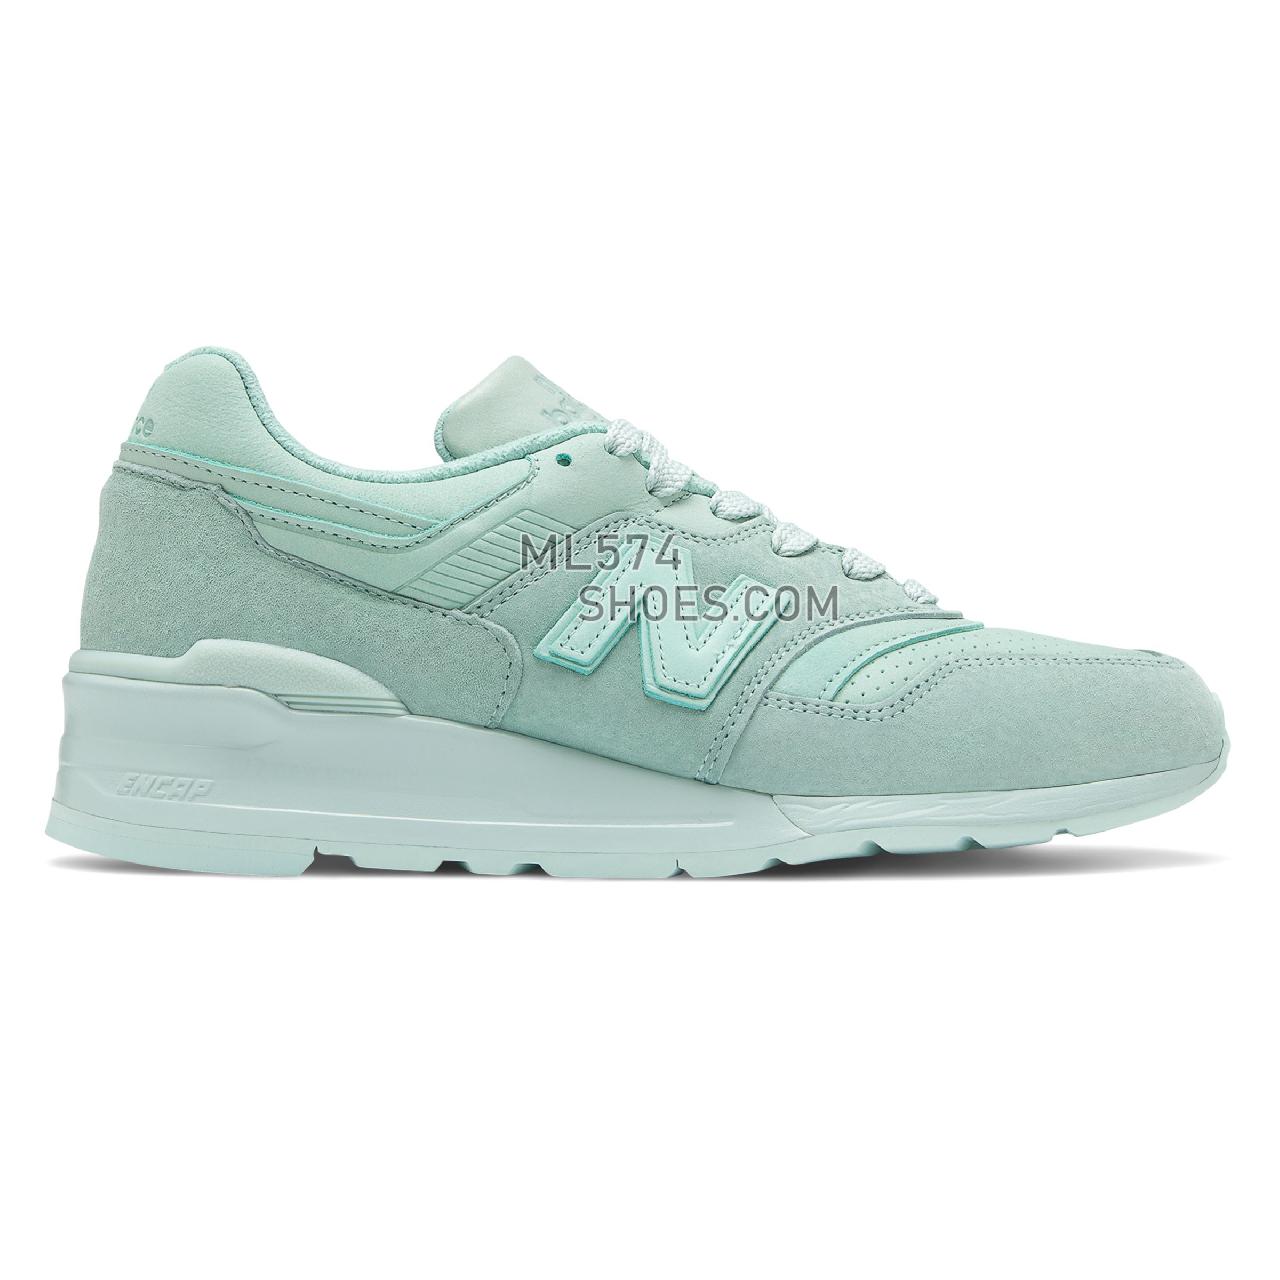 New Balance Made in US 997 - Men's Made in US 997 - Mint - M997LBE